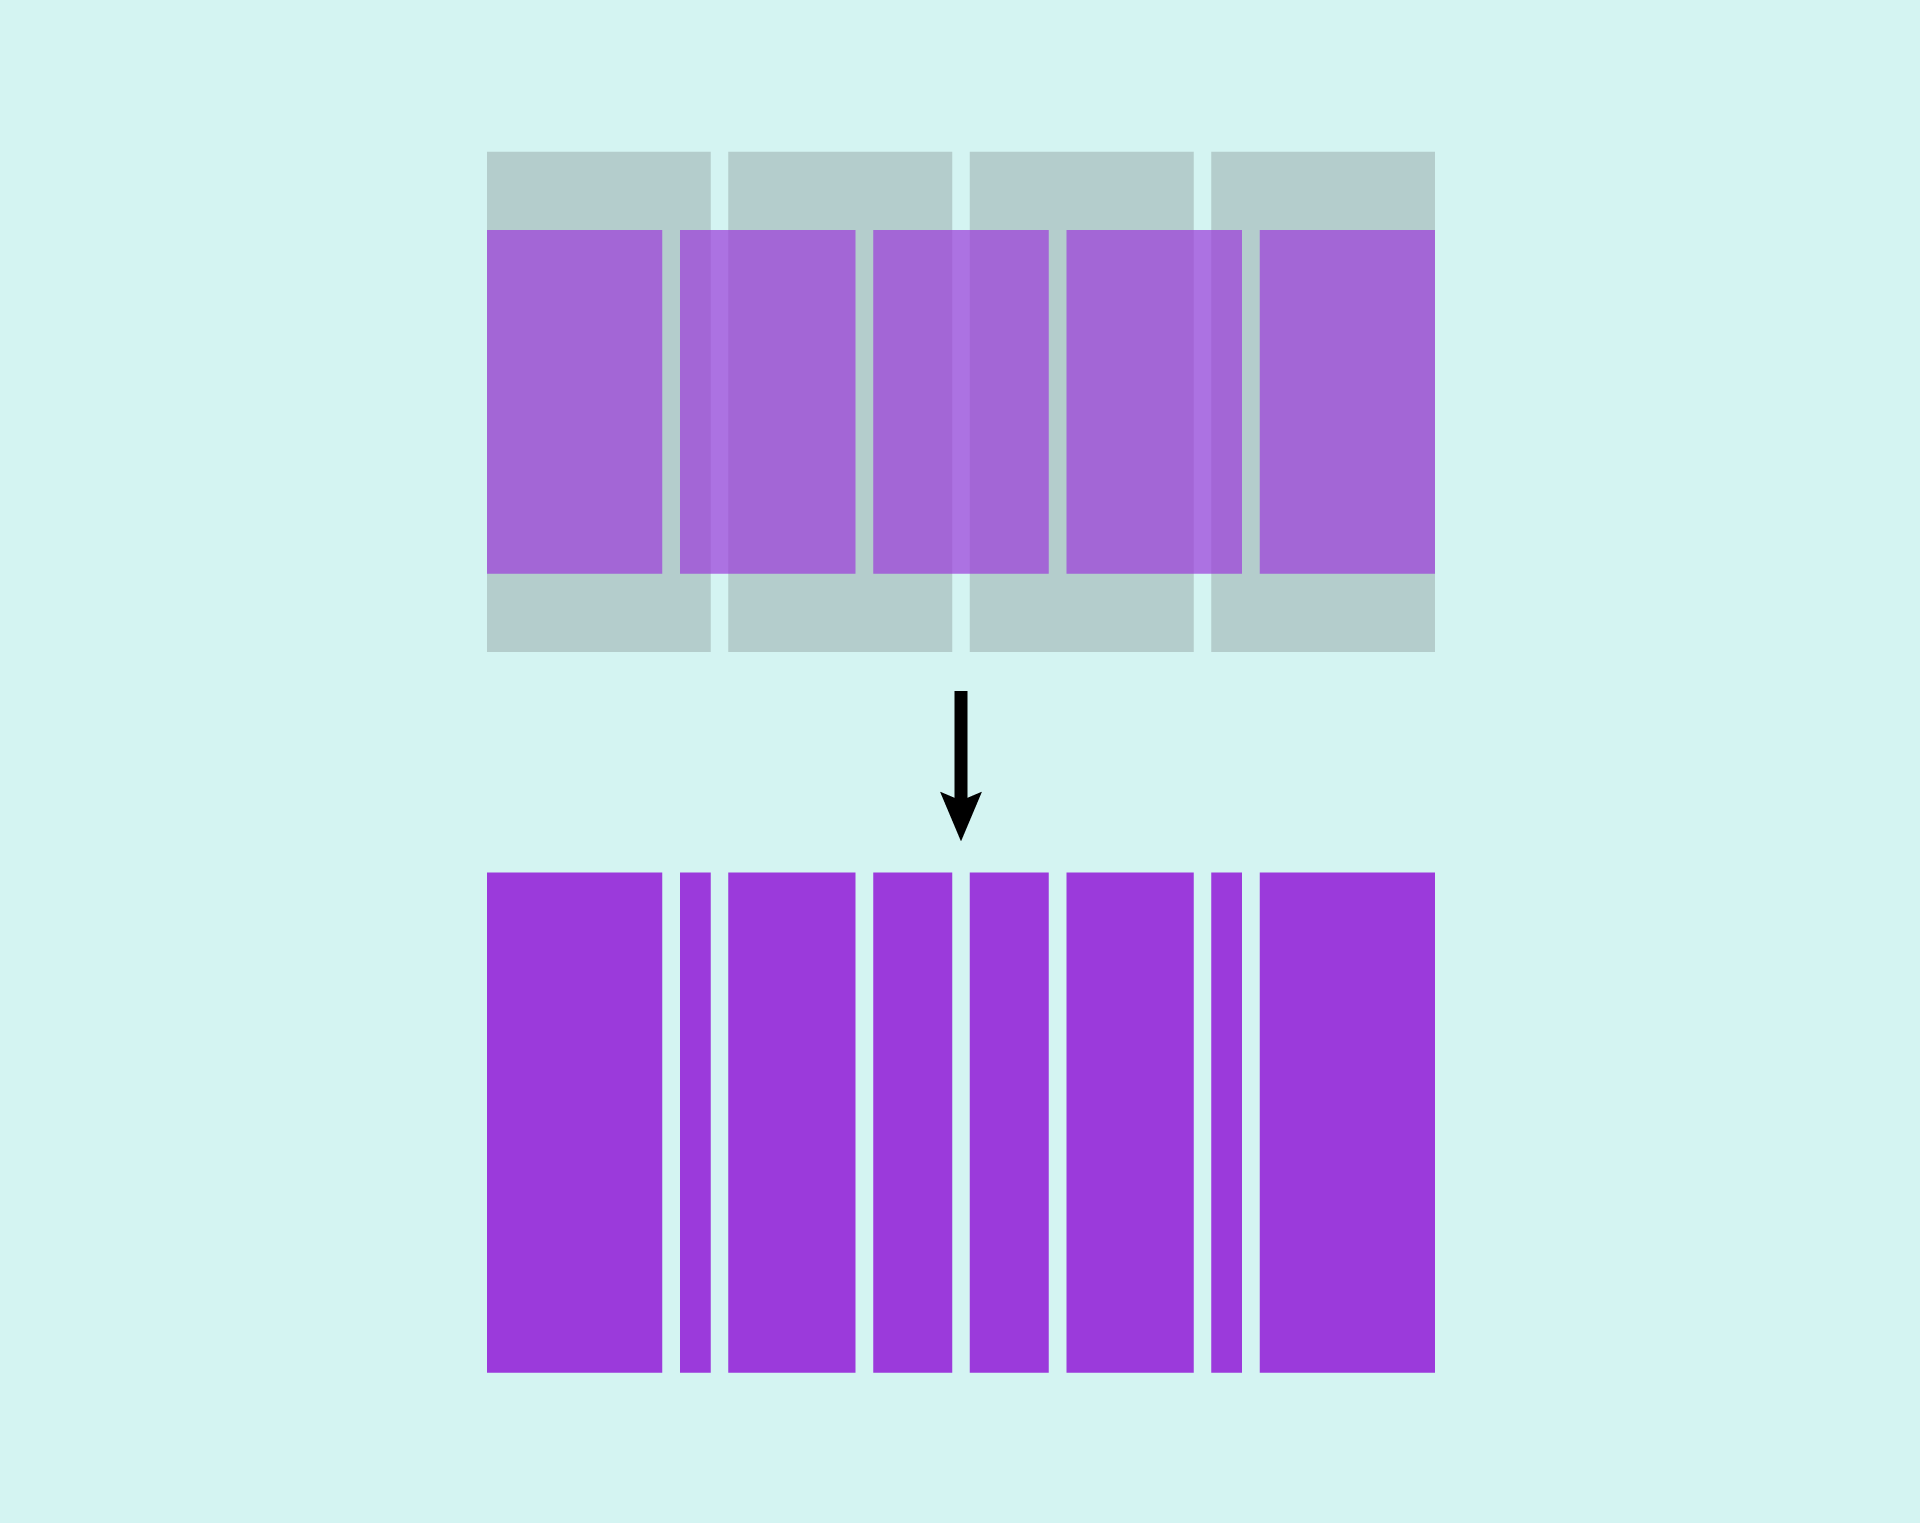 4-column and 5-column grids superimposed, with the result shown below